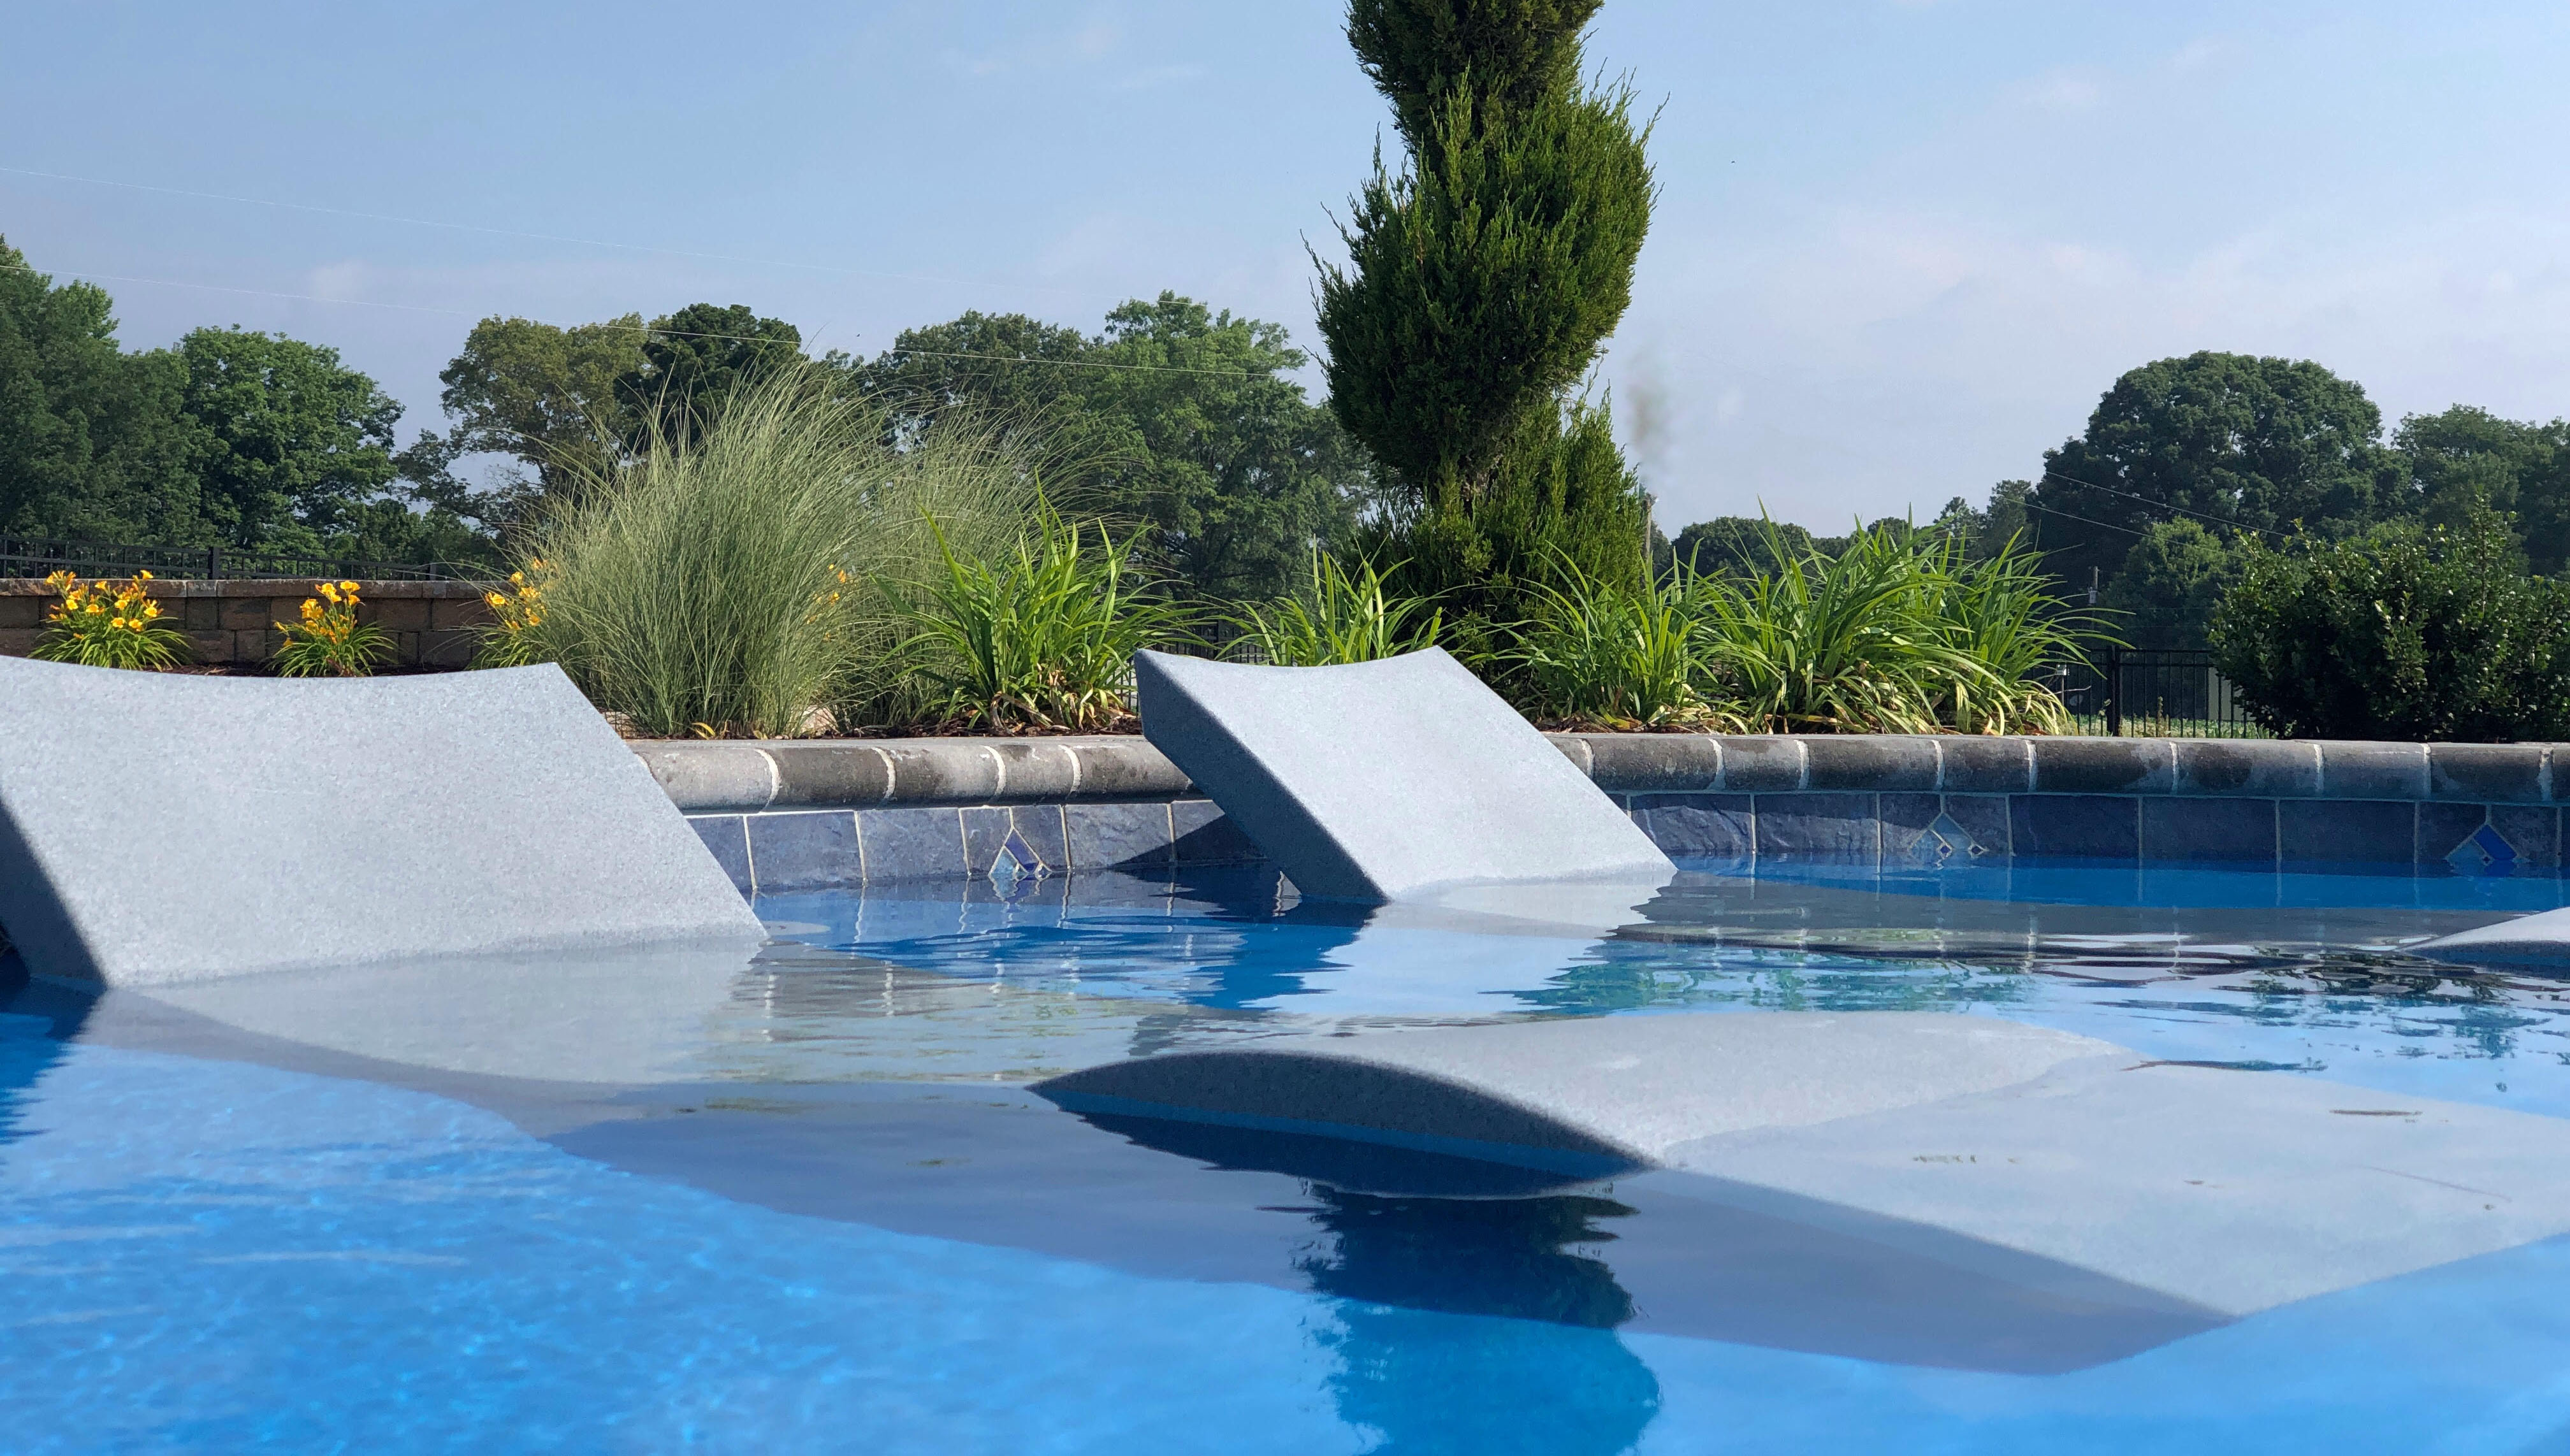 Types of In-Pool Furniture: Chairs, Tables, and Other Options